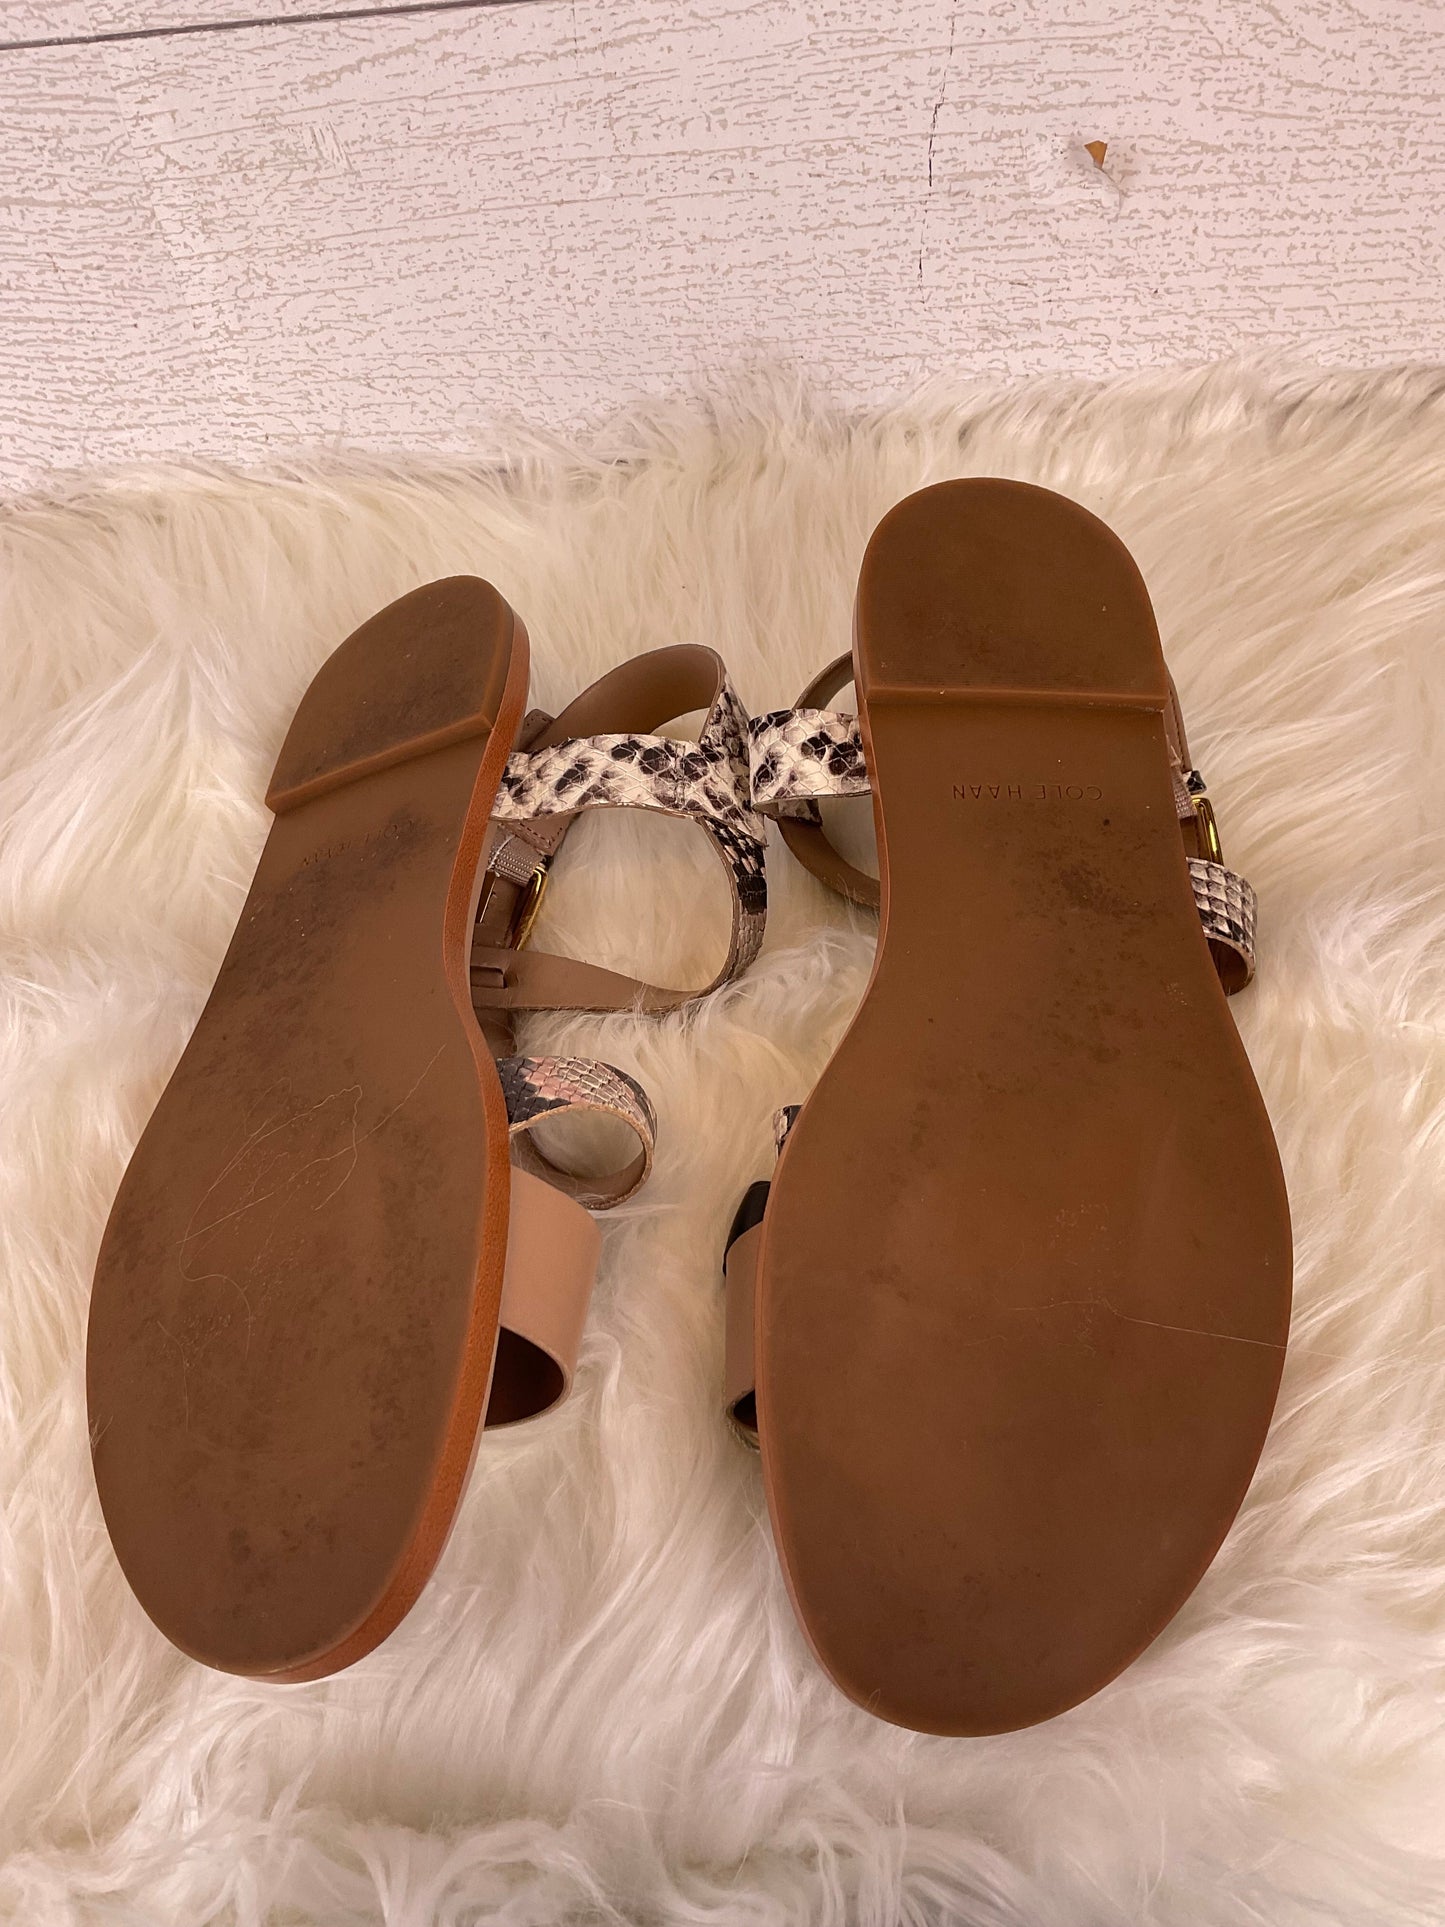 Sandals Flats By Cole-haan  Size: 9